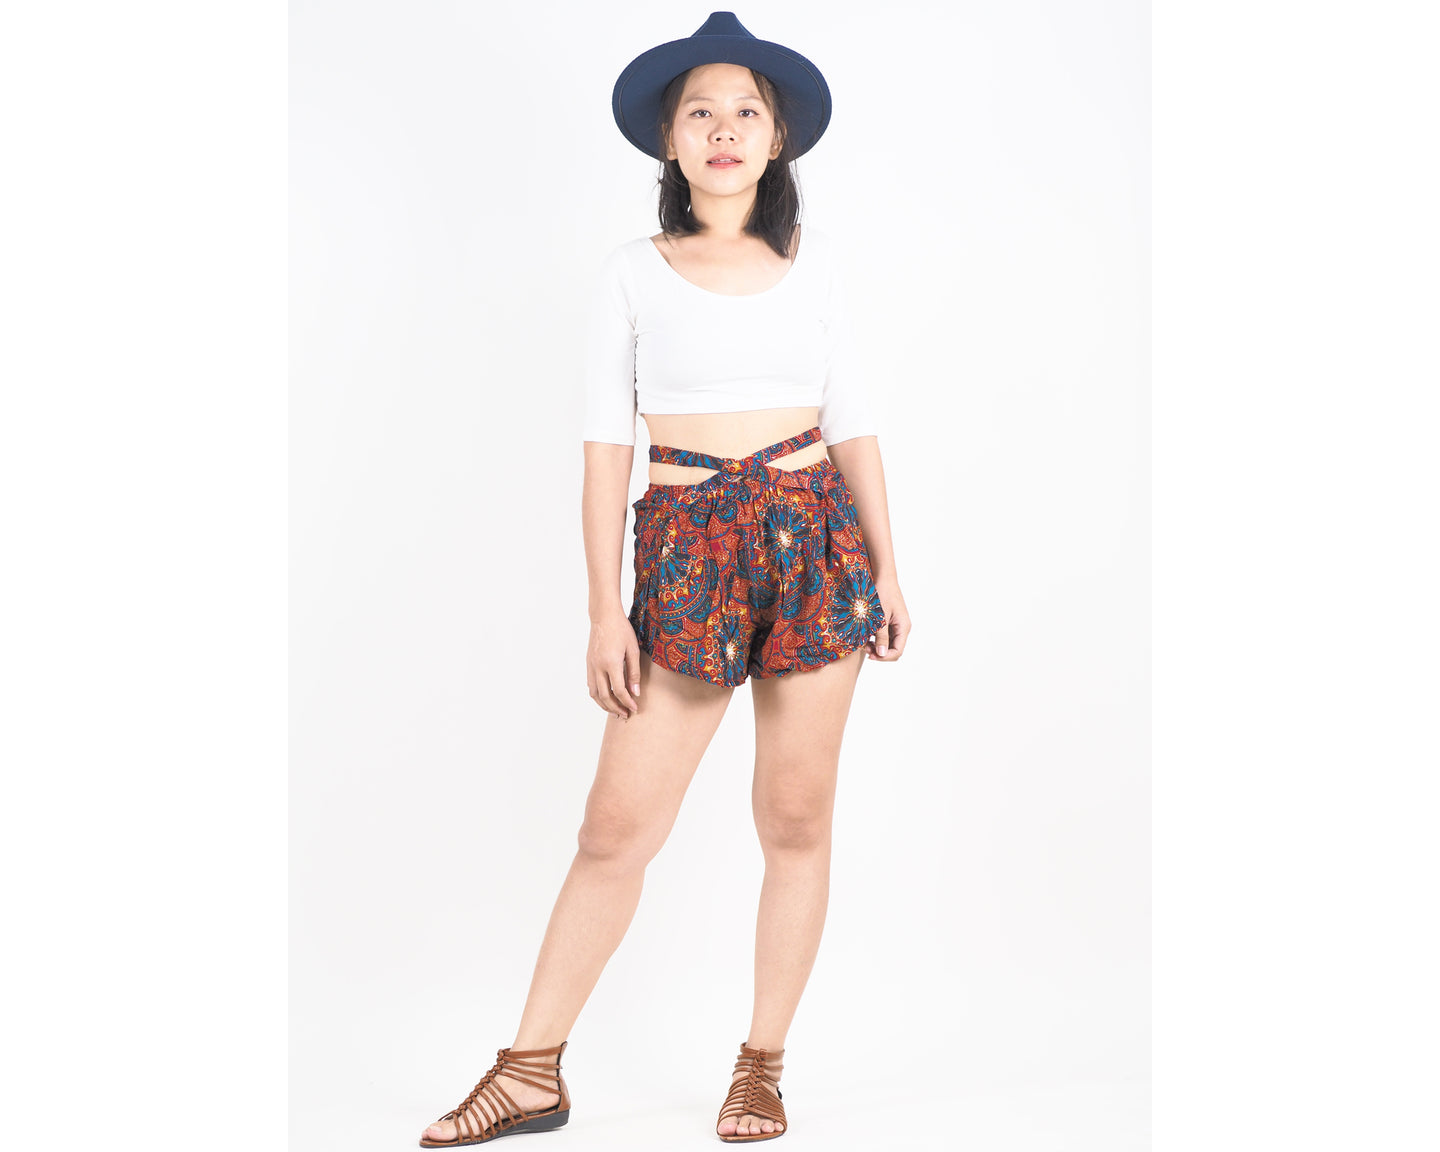 Sunflower Women's Blooming Shorts Pants in Red PP0206 020152 02